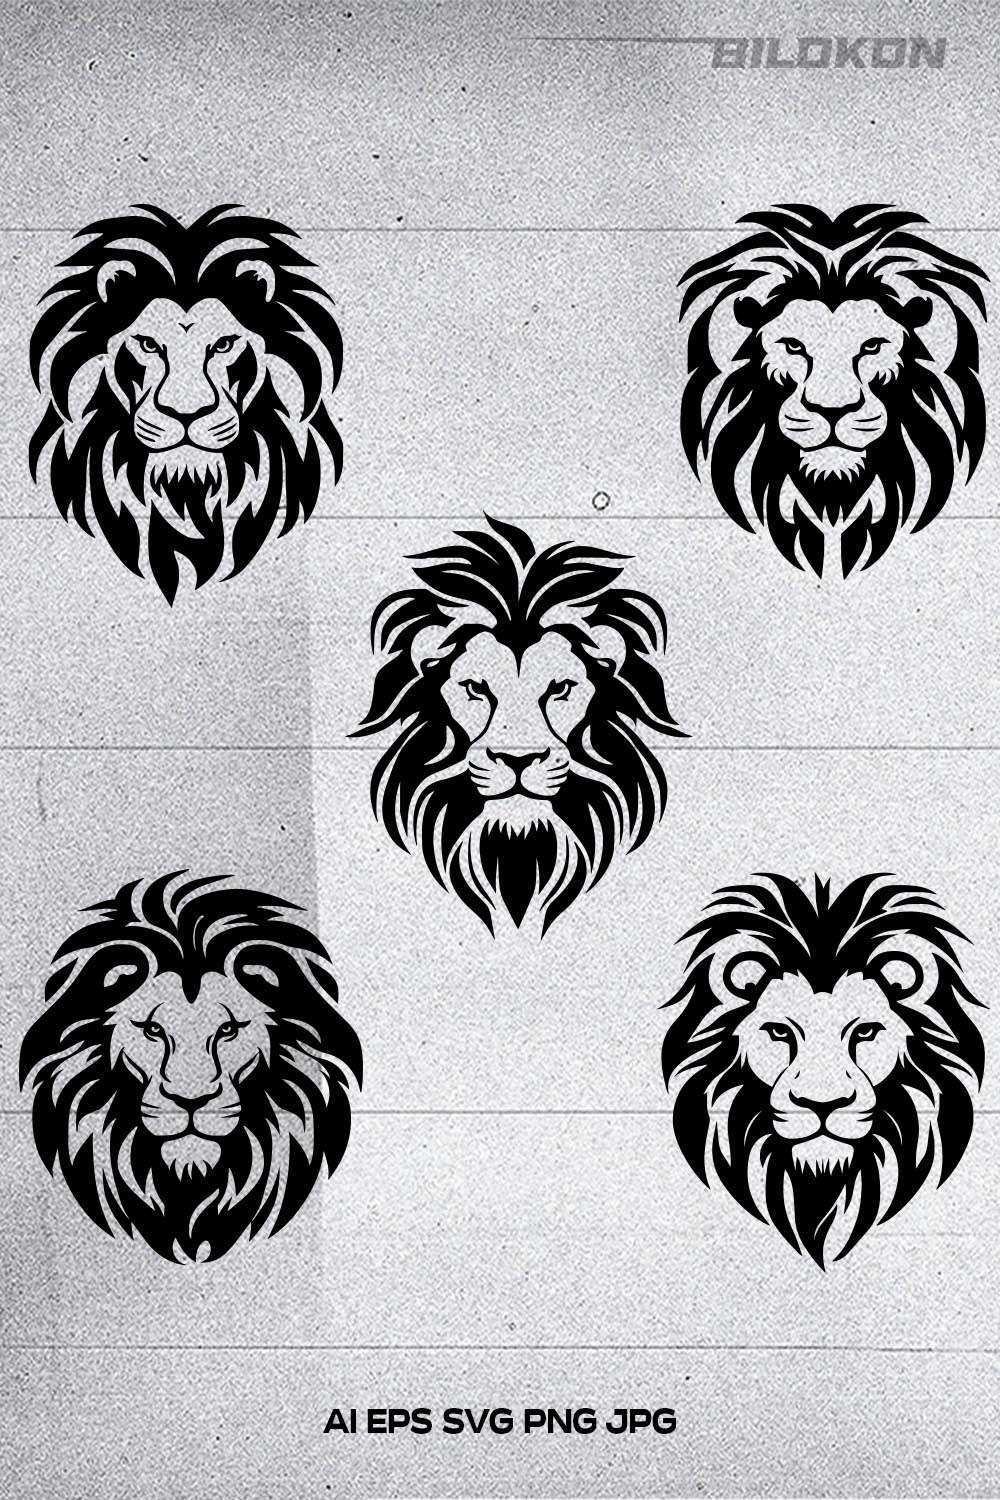 Lion head logo icon, lion face vector Illustration, on a isolated background, SVG pinterest preview image.